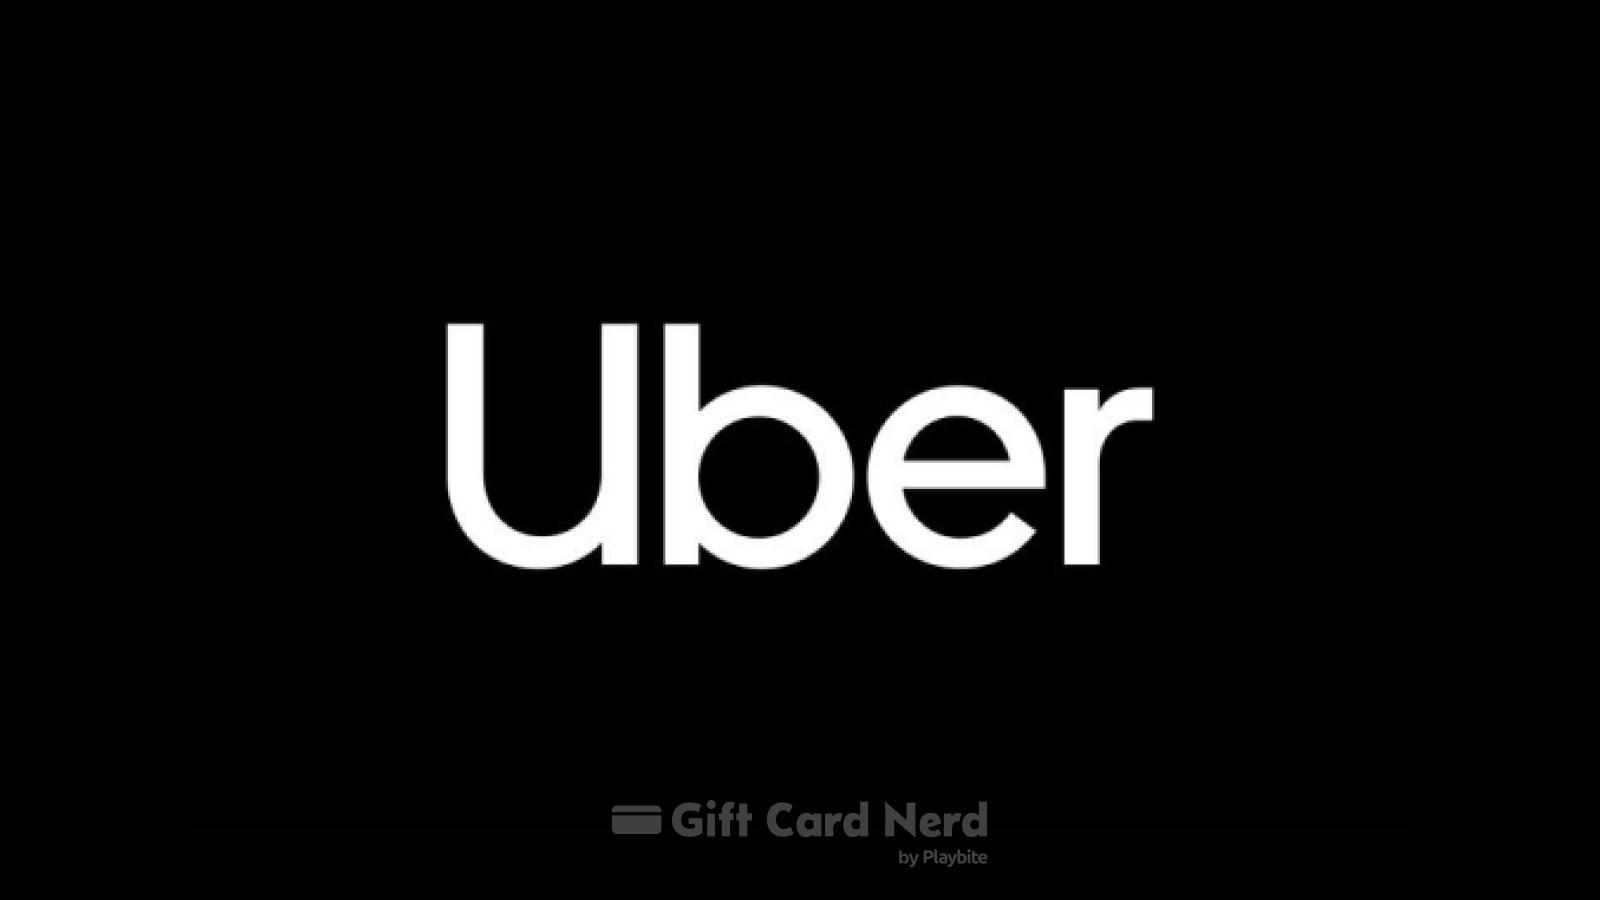 Can You Use an Uber Gift Card on PayPal?